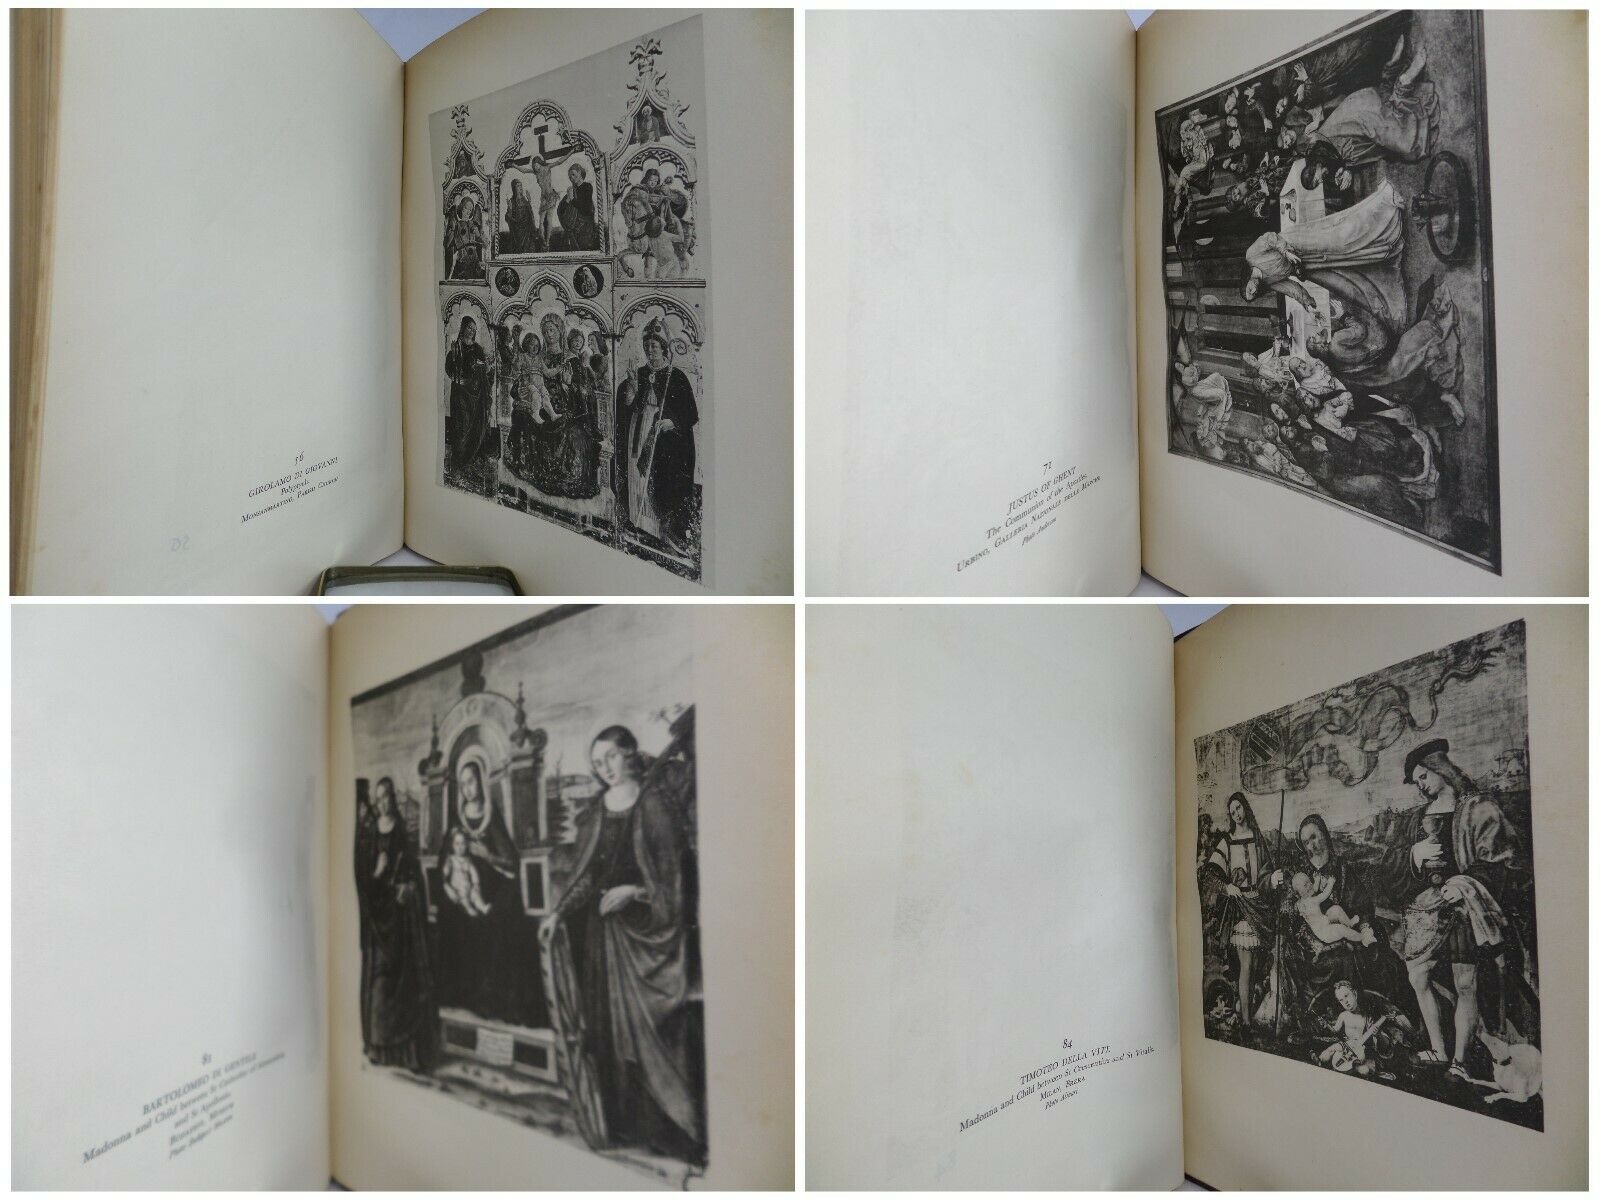 ITALIAN PAINTING OF THE QUATTROCENTO IN THE MARCHES BY ARDUINO COLASANTI 1932